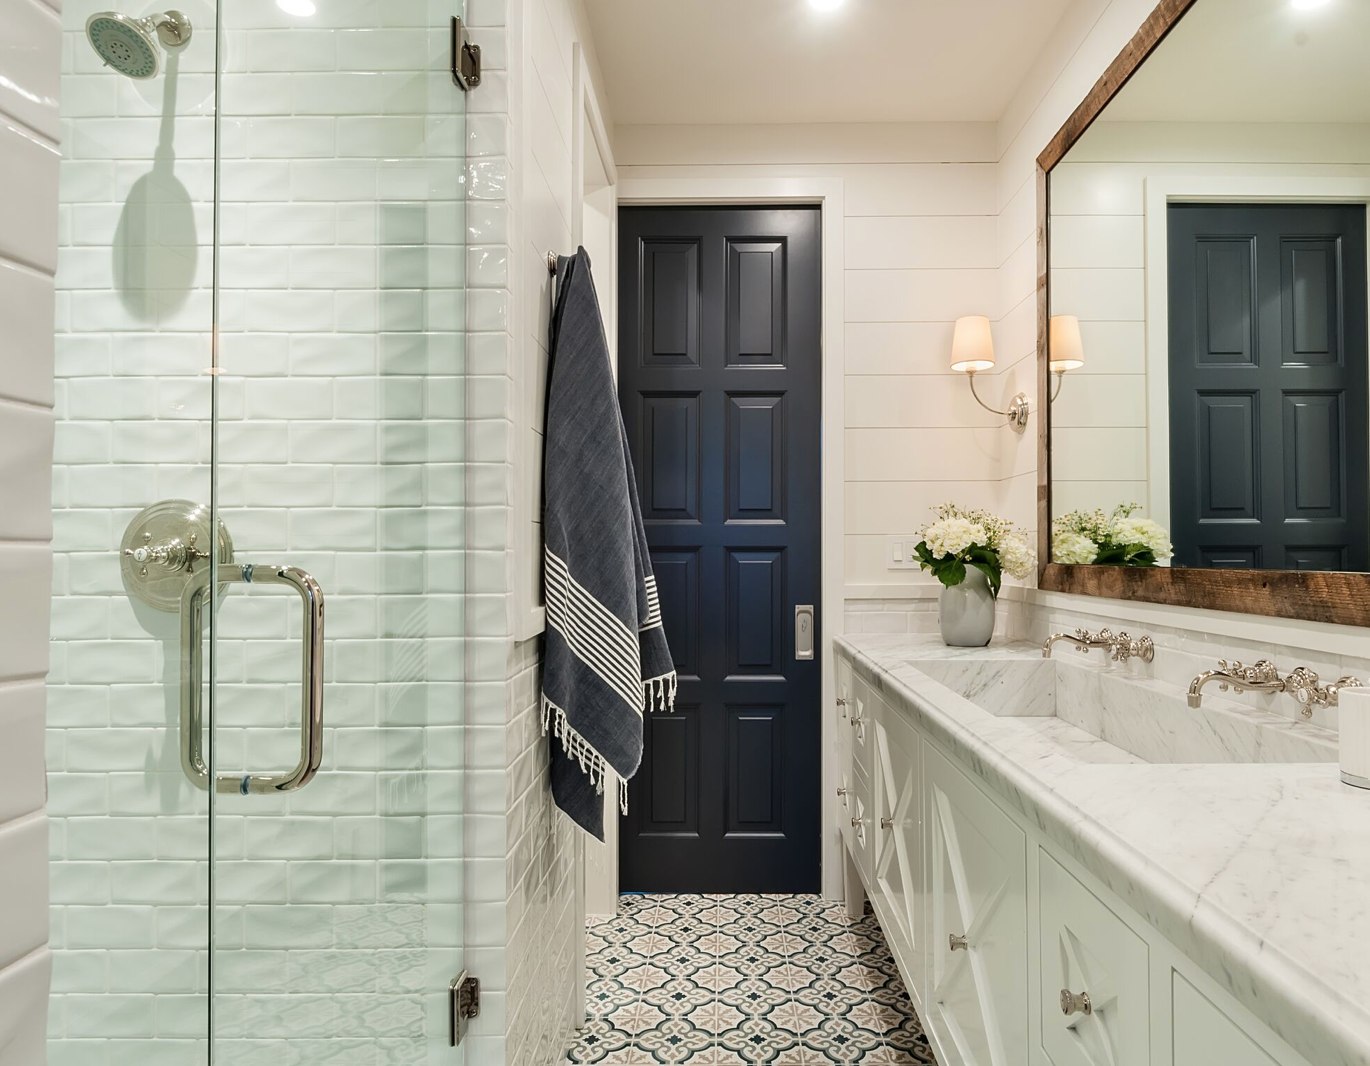 If you’ve been reading the Lori Dennis Green Blog for very long, you know we’re suckers for a ceramic tile that makes a statement! They’re durable, stylish, and perfect for the flooring or backsplash of your modern coastal farmhouse.